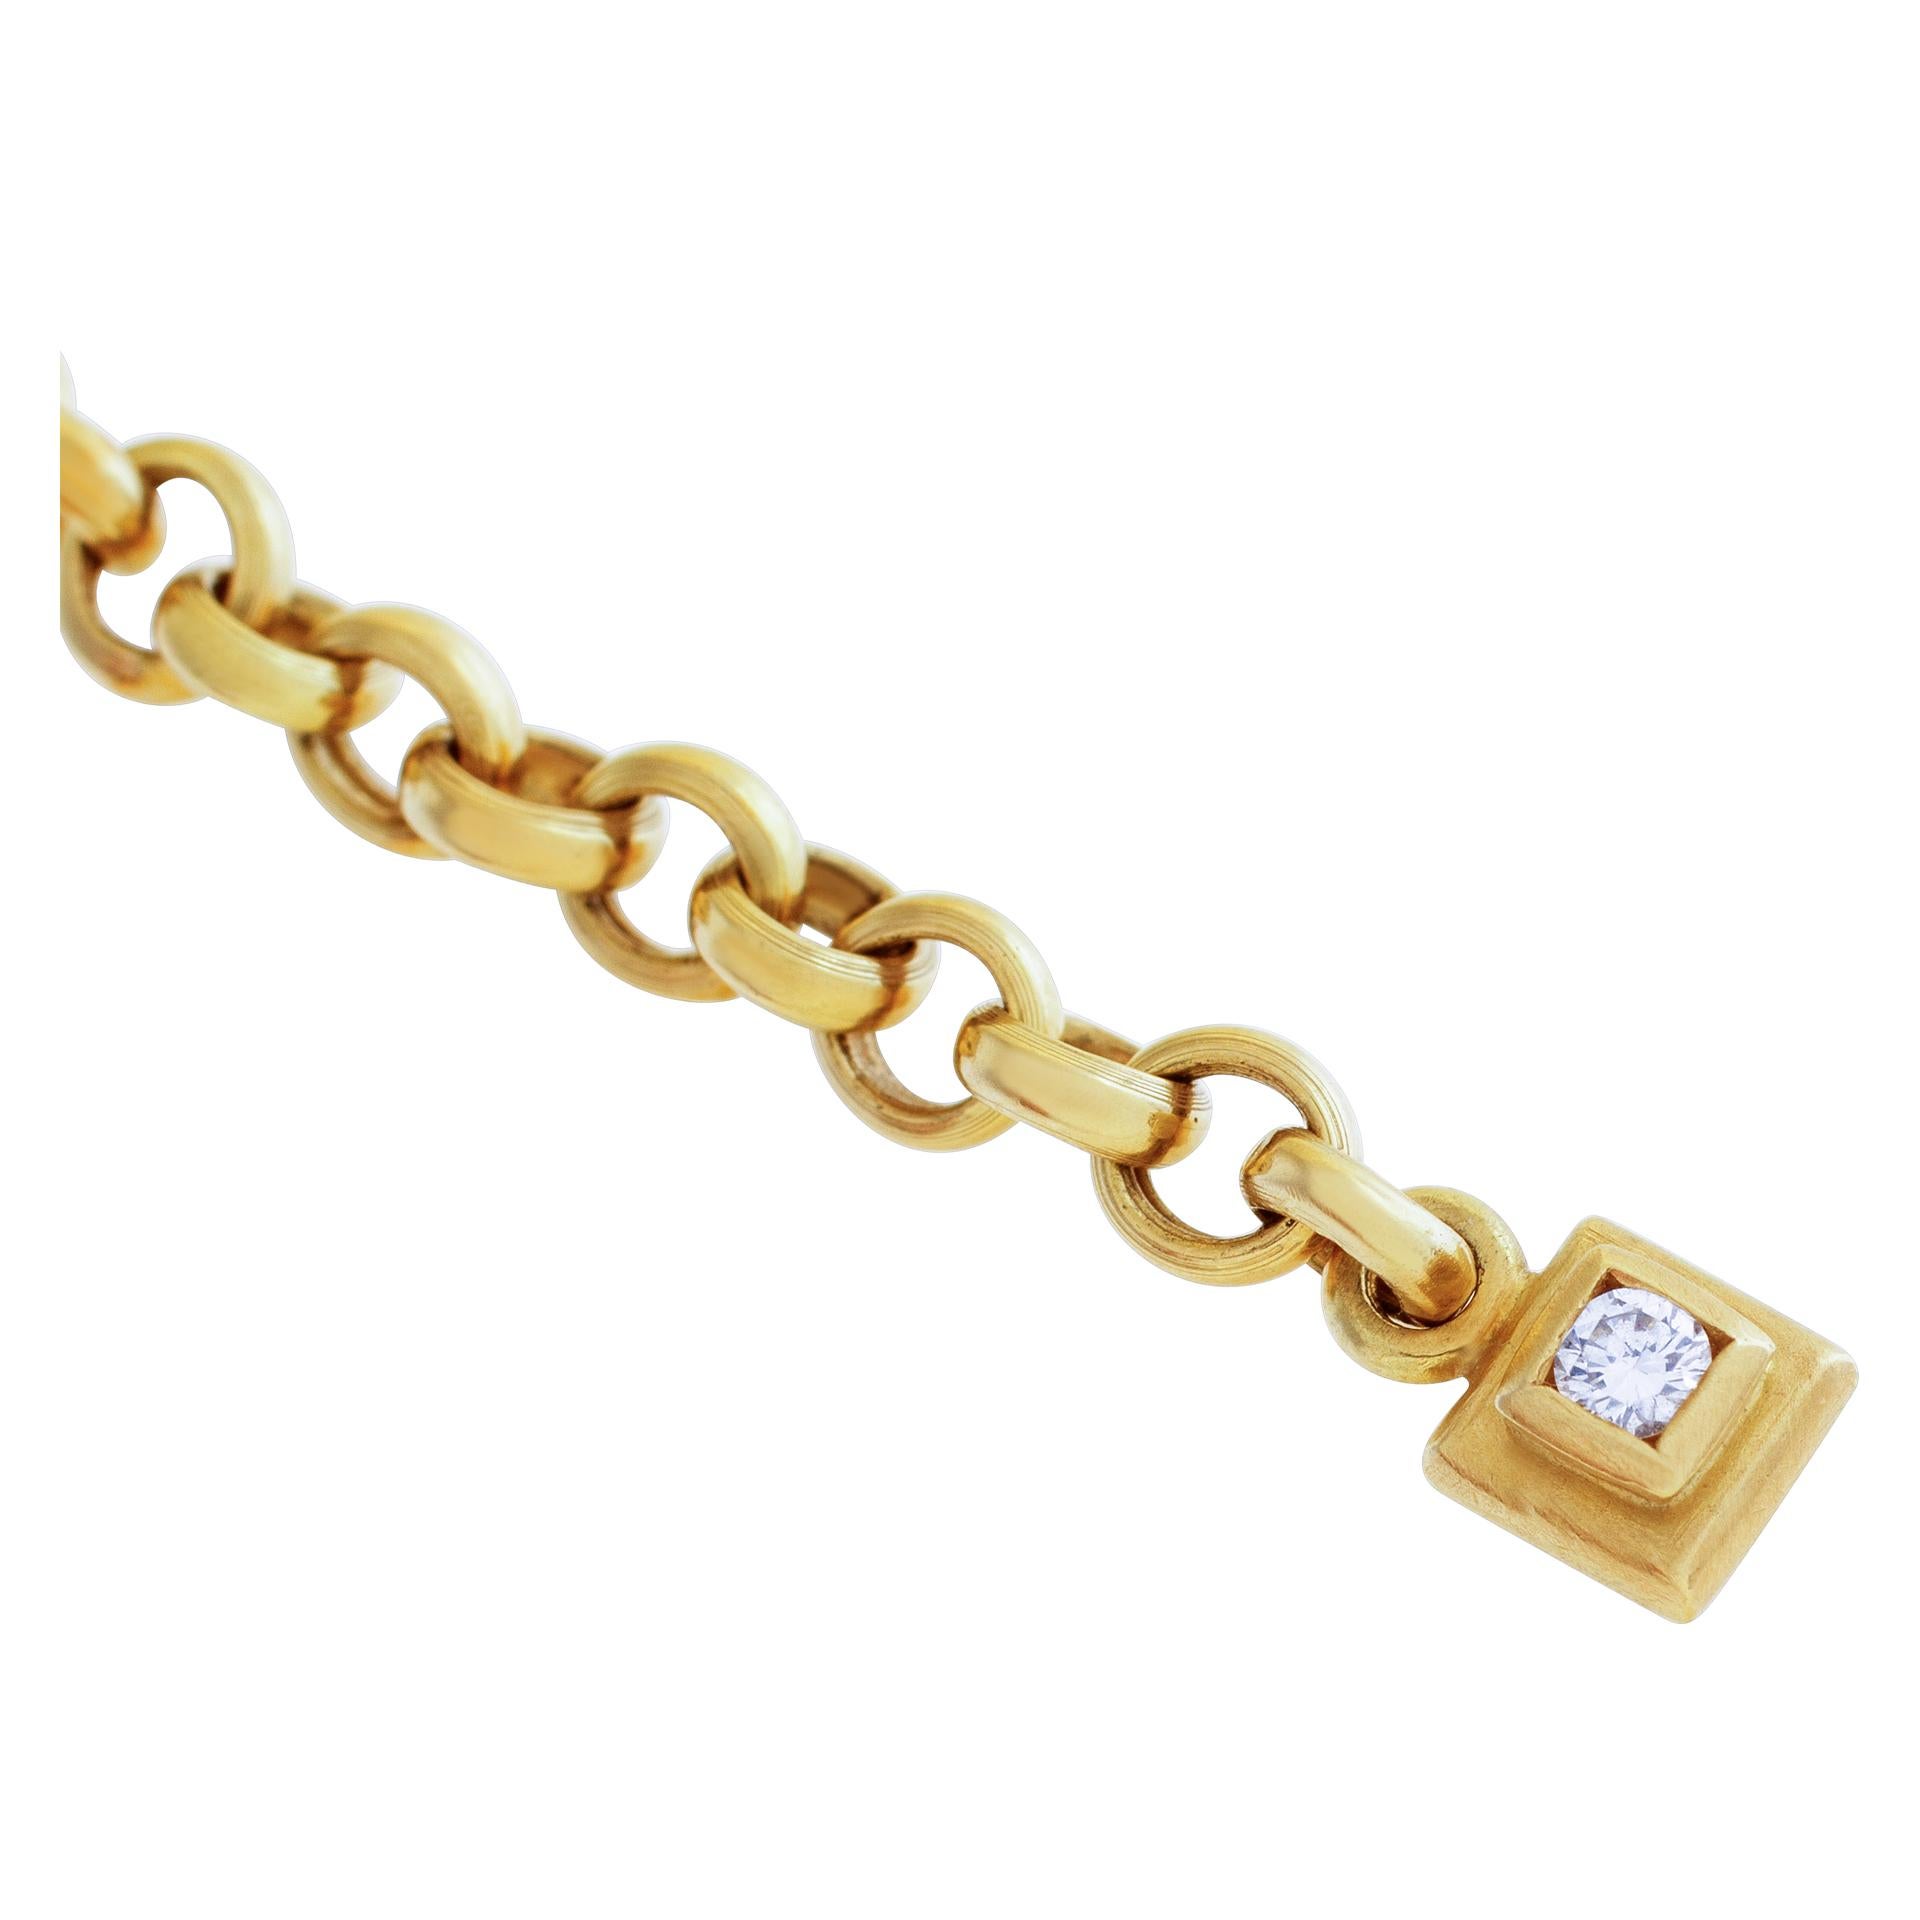 ESTIMATED RETAIL: $7,900.00 YOUR PRICE: $5,520 Solid Multi-string bracelet in 18k yellow gold, hallmarks with 3 stars. The chain has a star with a diamond center. Bracelet is 6